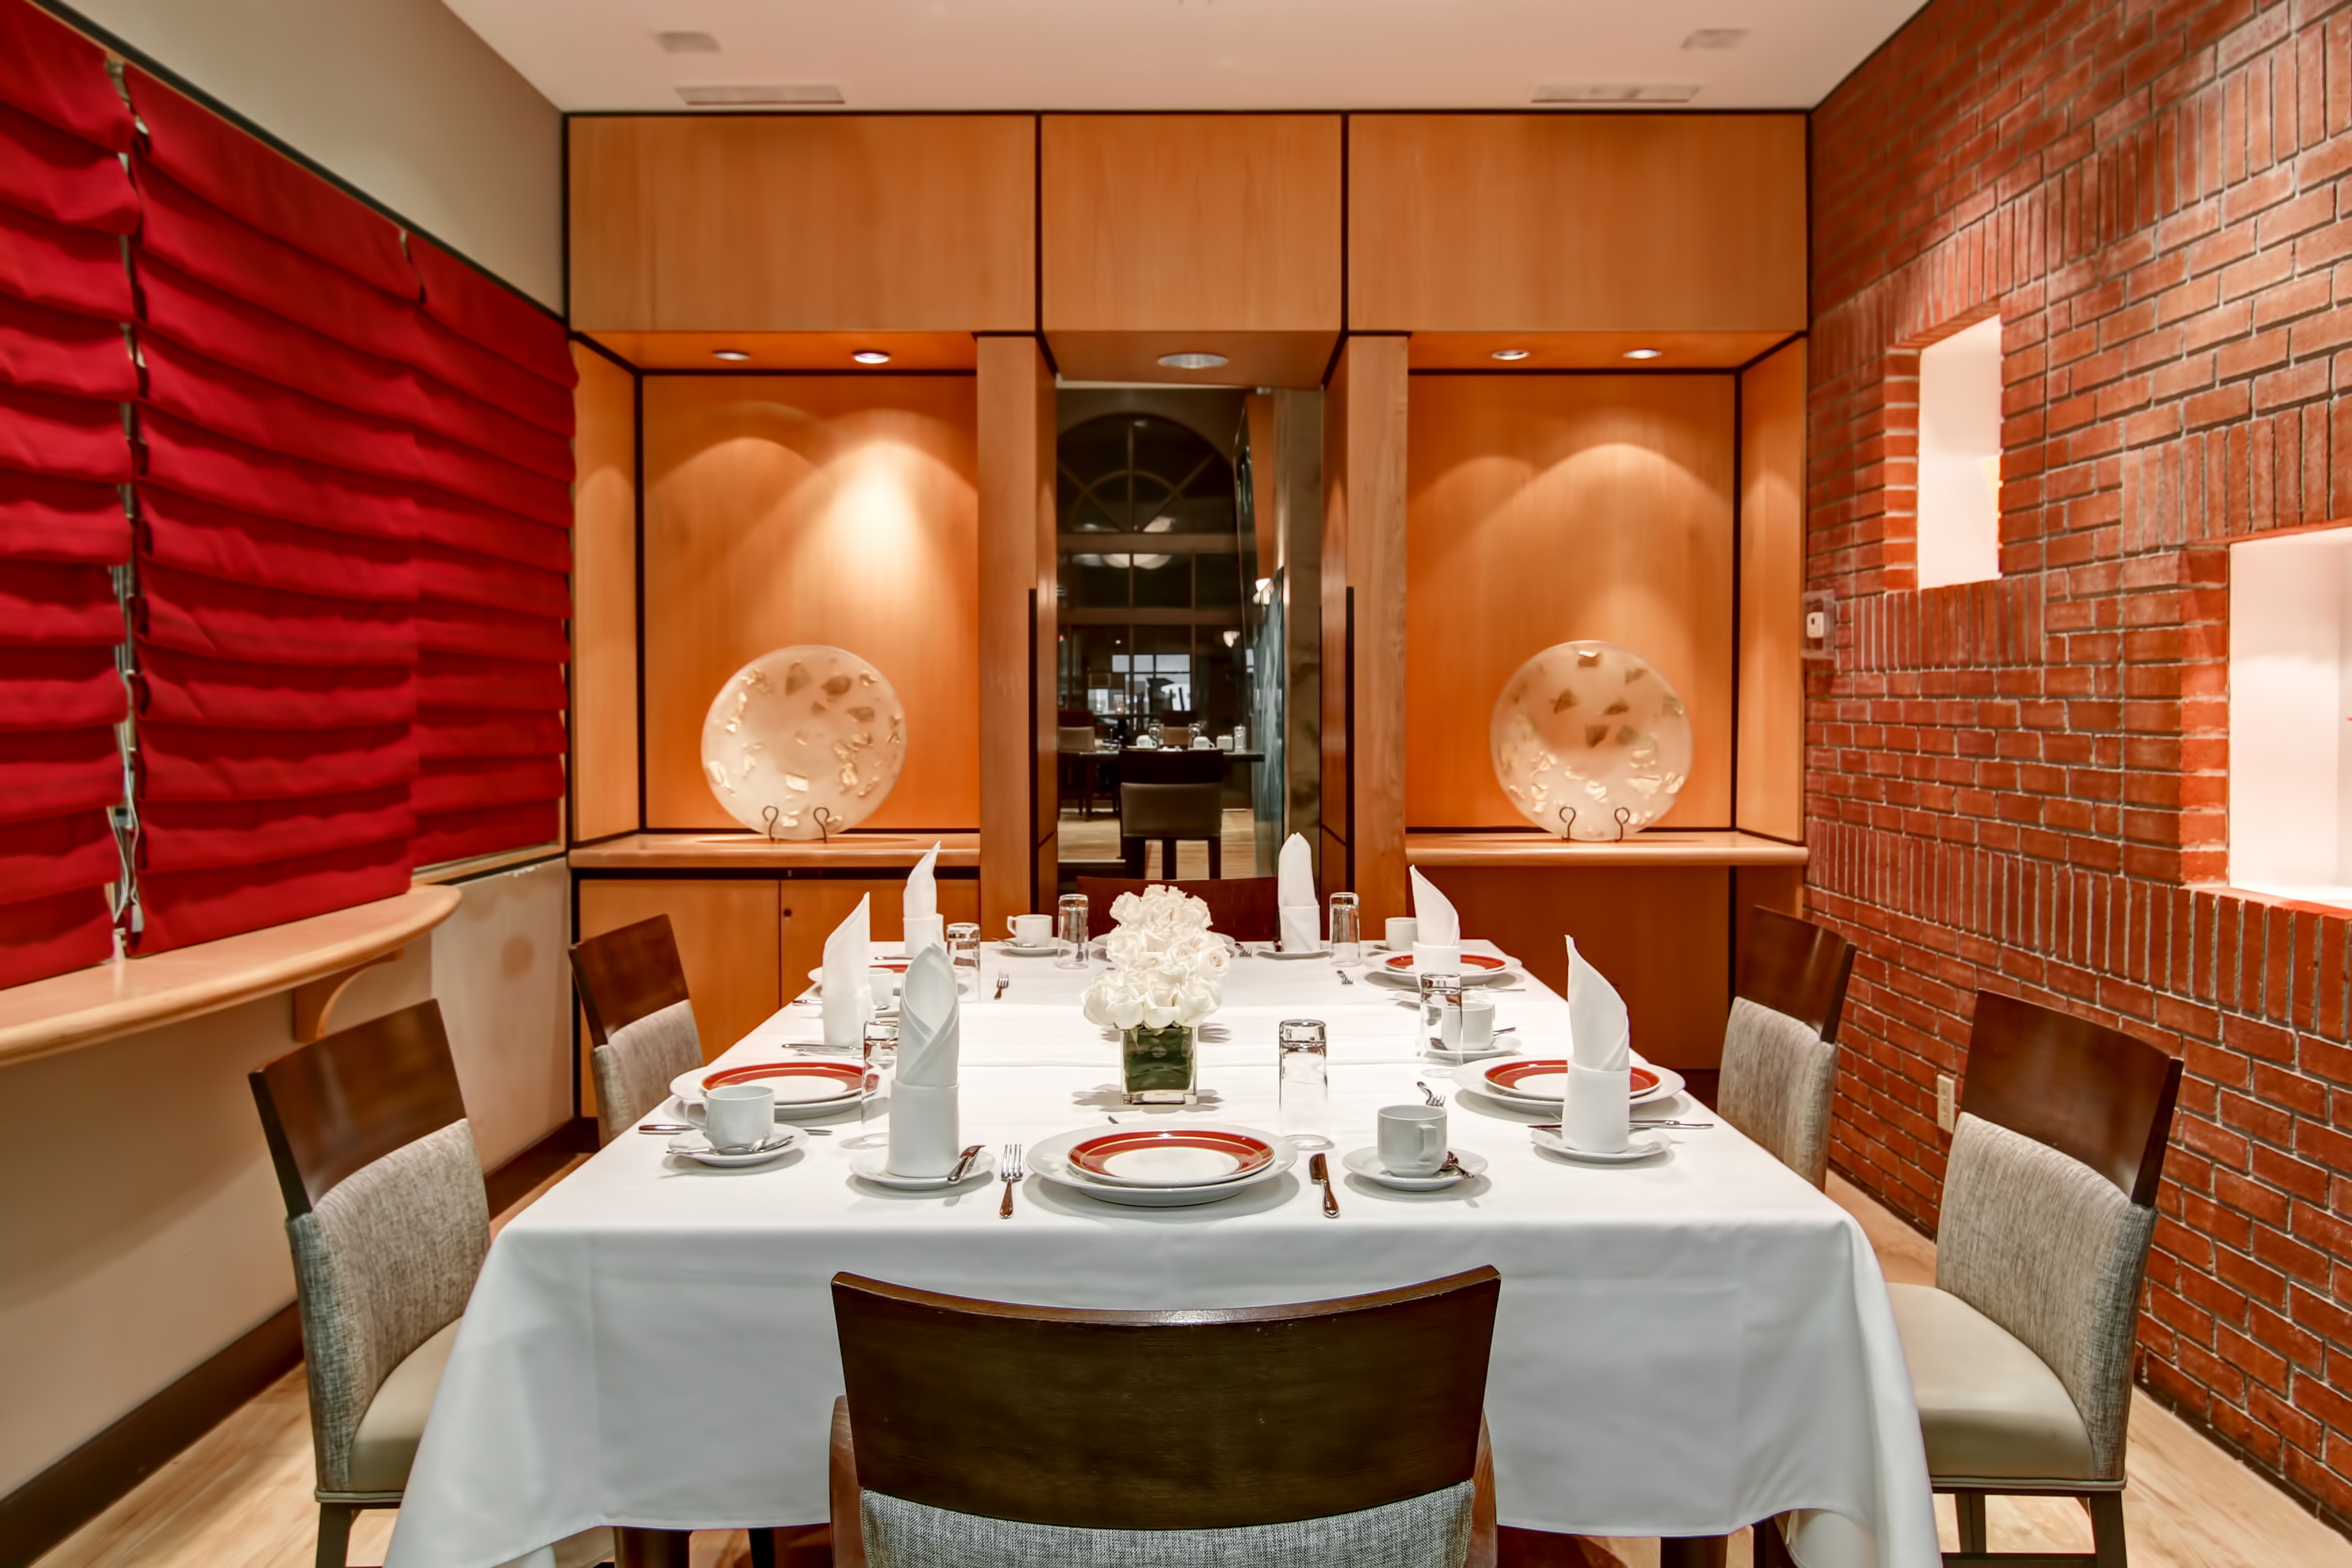 Private Dining Room with Dining Table for Six